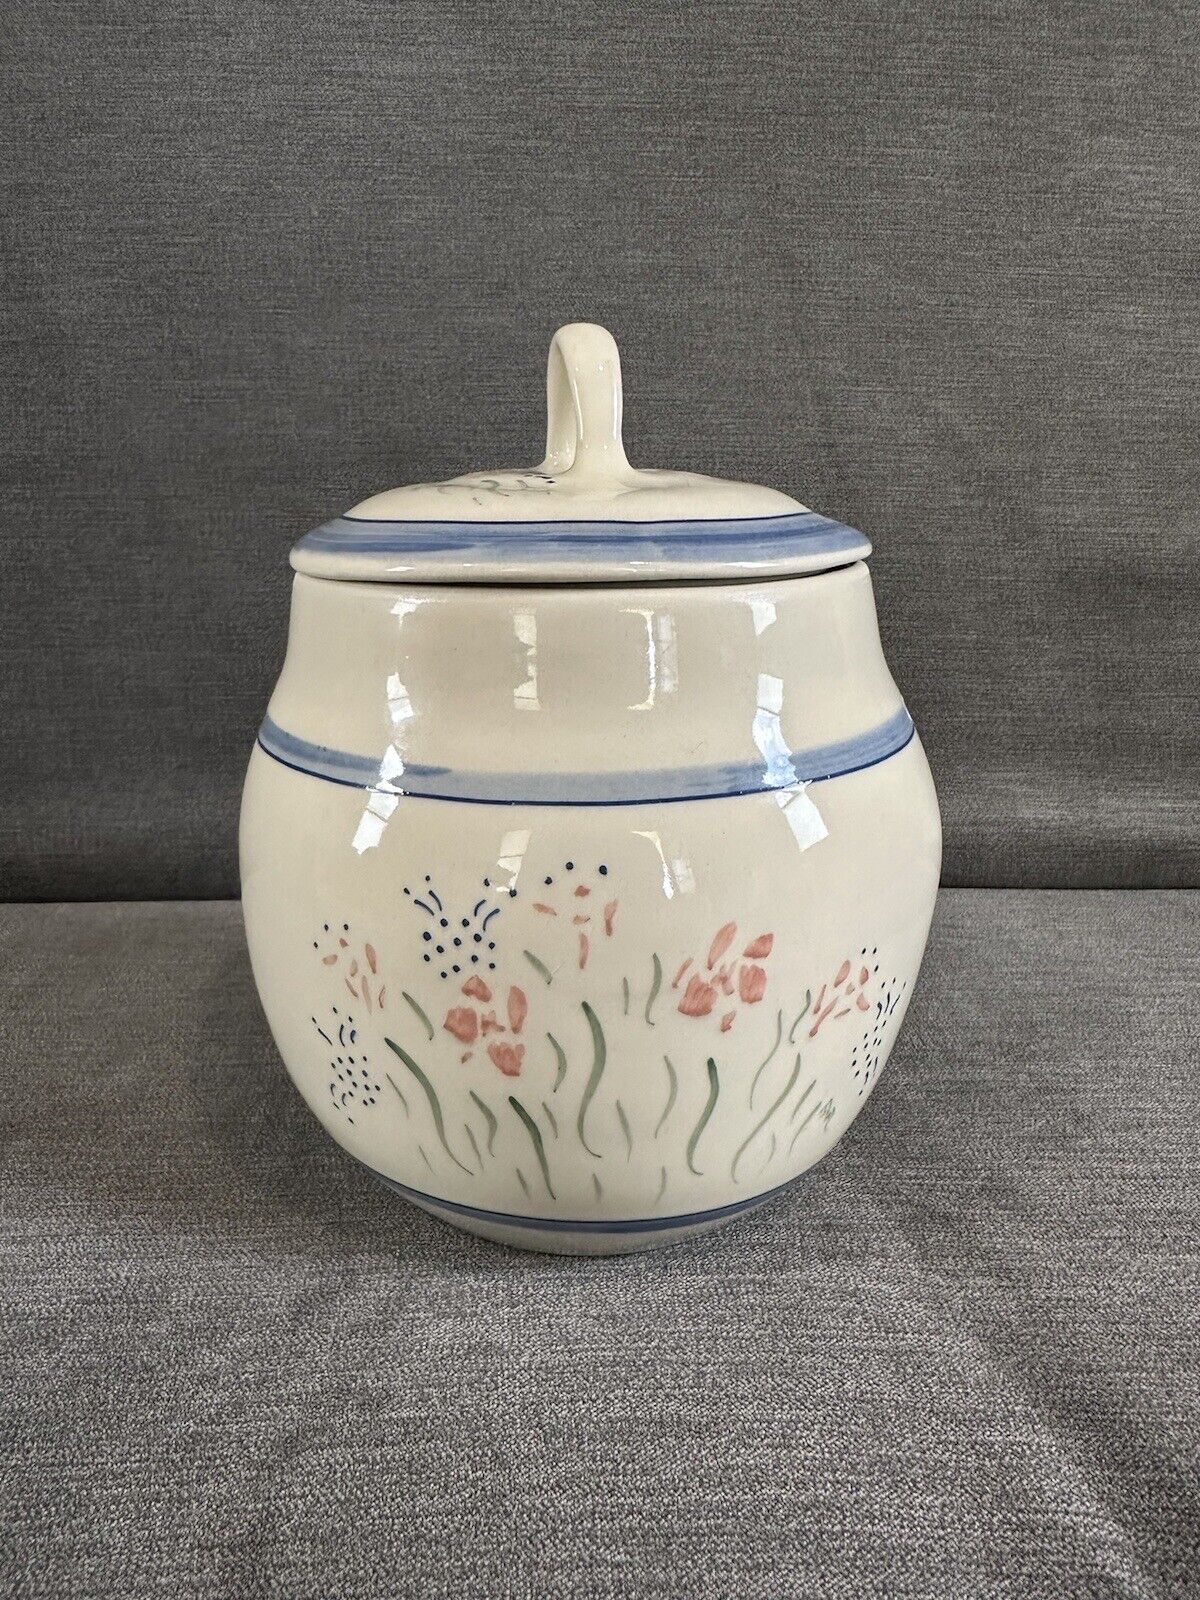 Vintage Longaberger By Hartstone Blue And White Floral Soup Tureen And Lid HTF